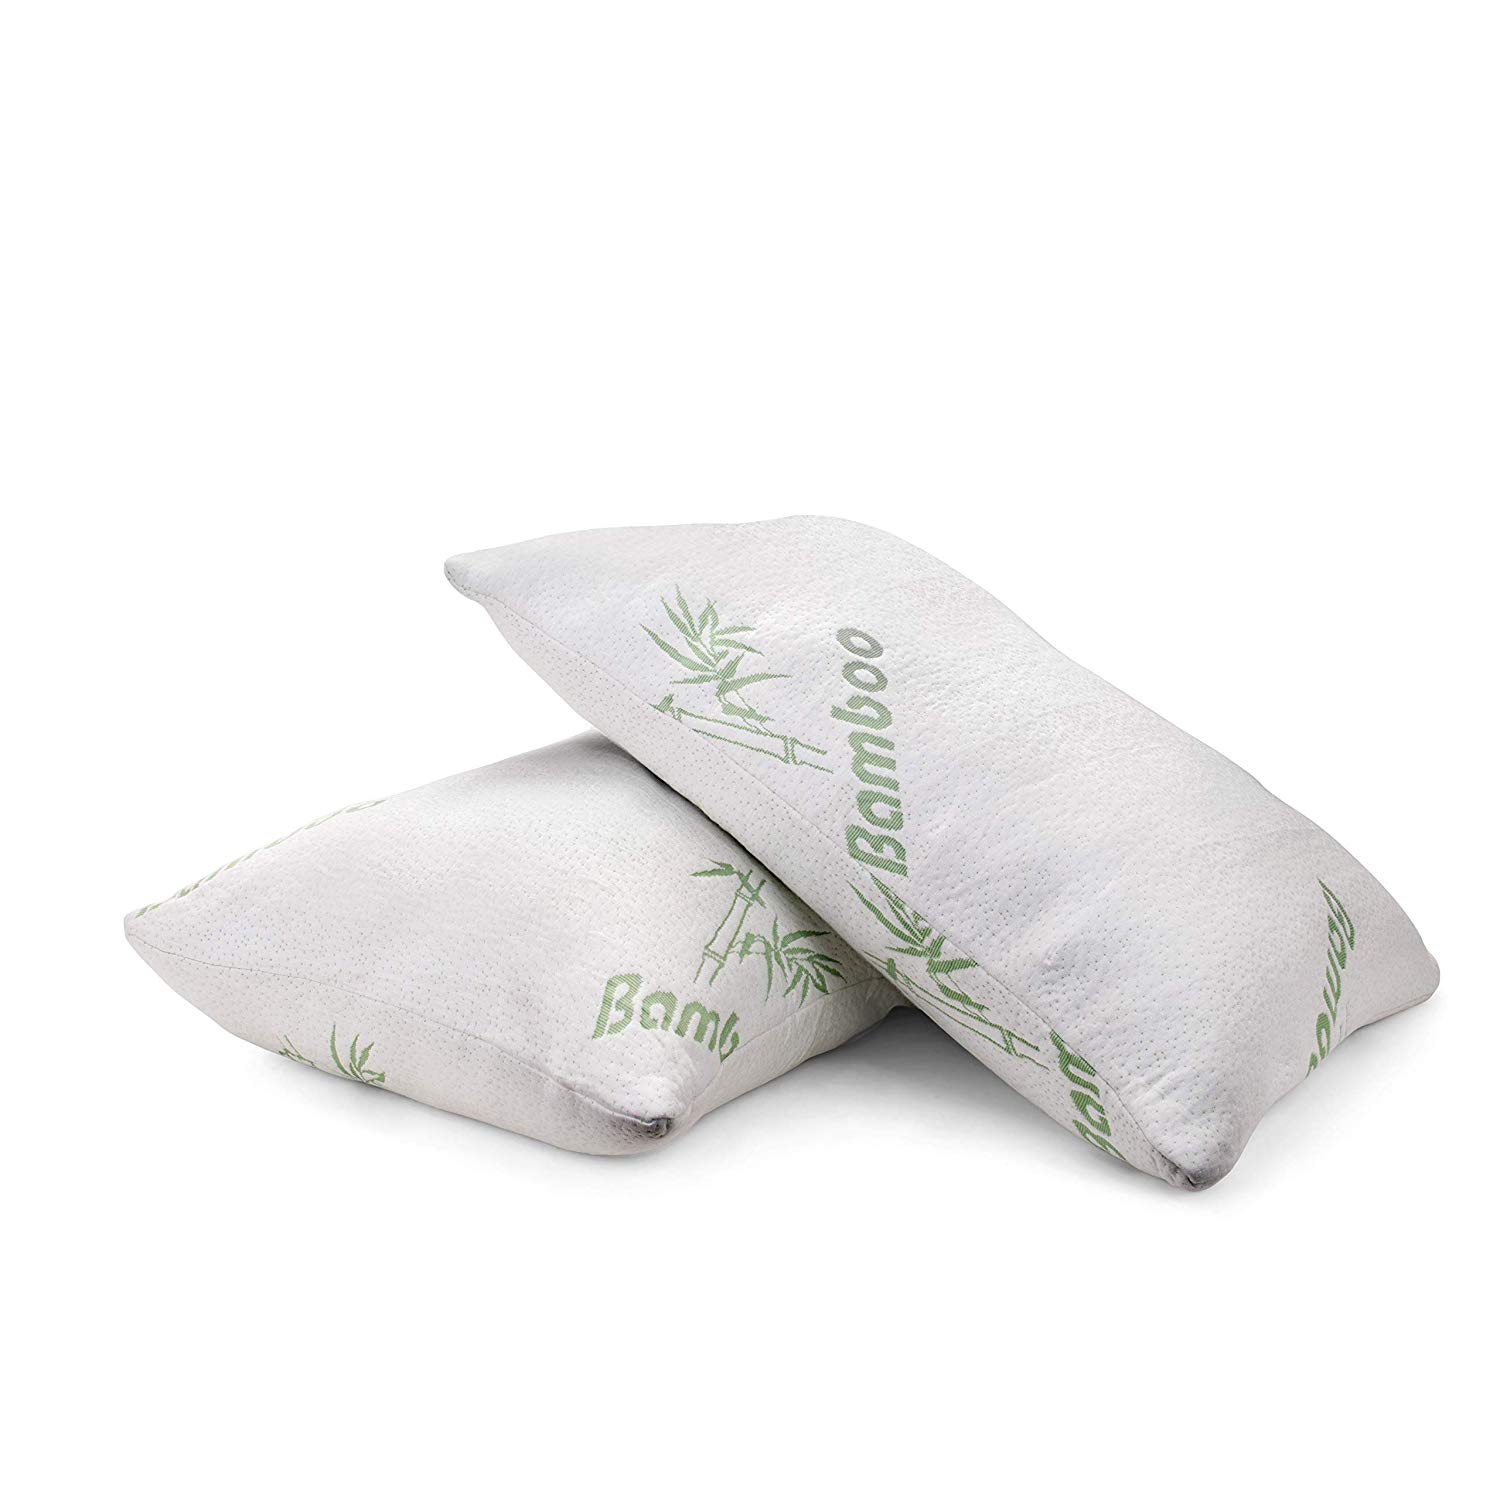 Bamboo Pillow for Sleeping Cooling Shredded Memory Foam Bed Pillows Soft